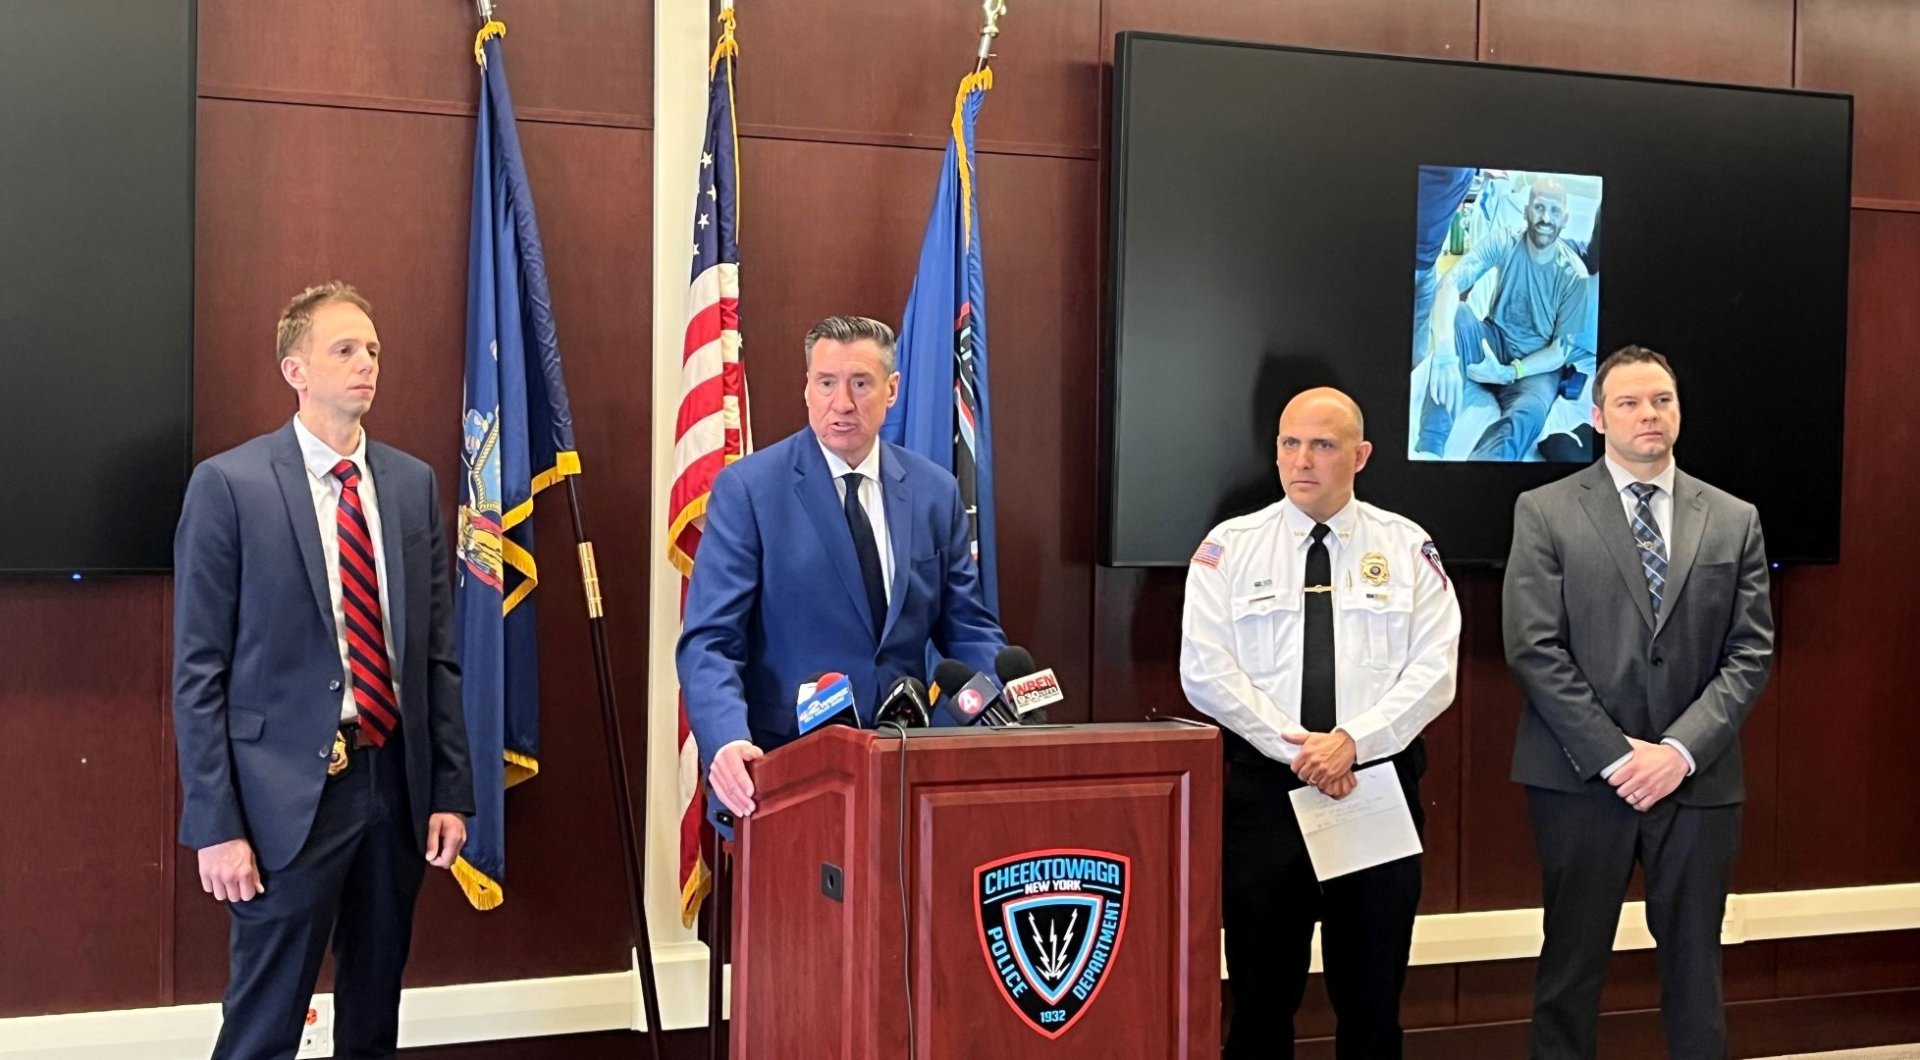 DA, Cheektowaga Police Announce Indictment of Teenager Accused of Injuring Officer Blackchief